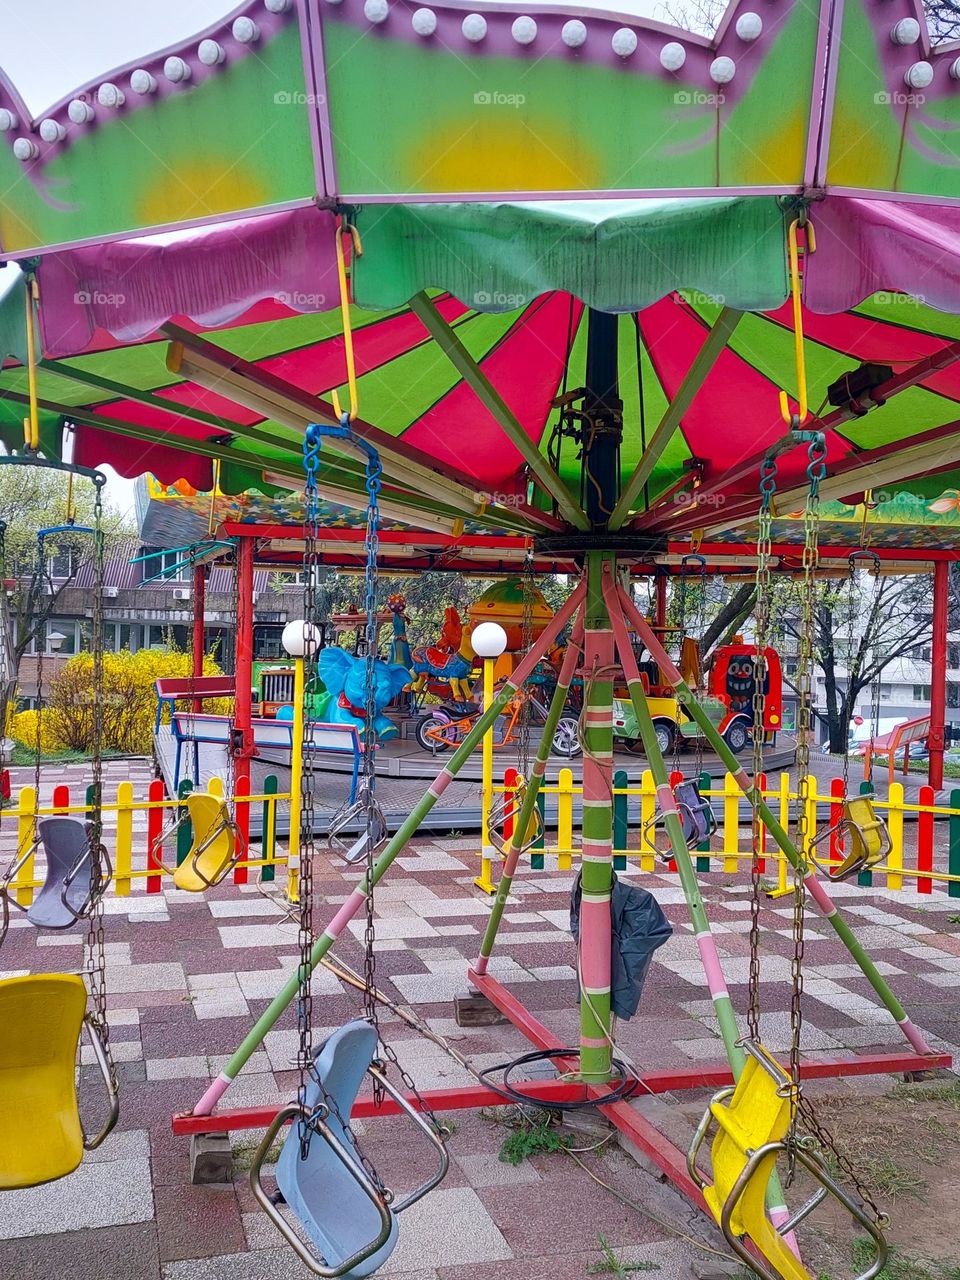 Colorful carousel in the children's amusement park.  Dominance geometric shapes: triangle,  rectangle, and circles